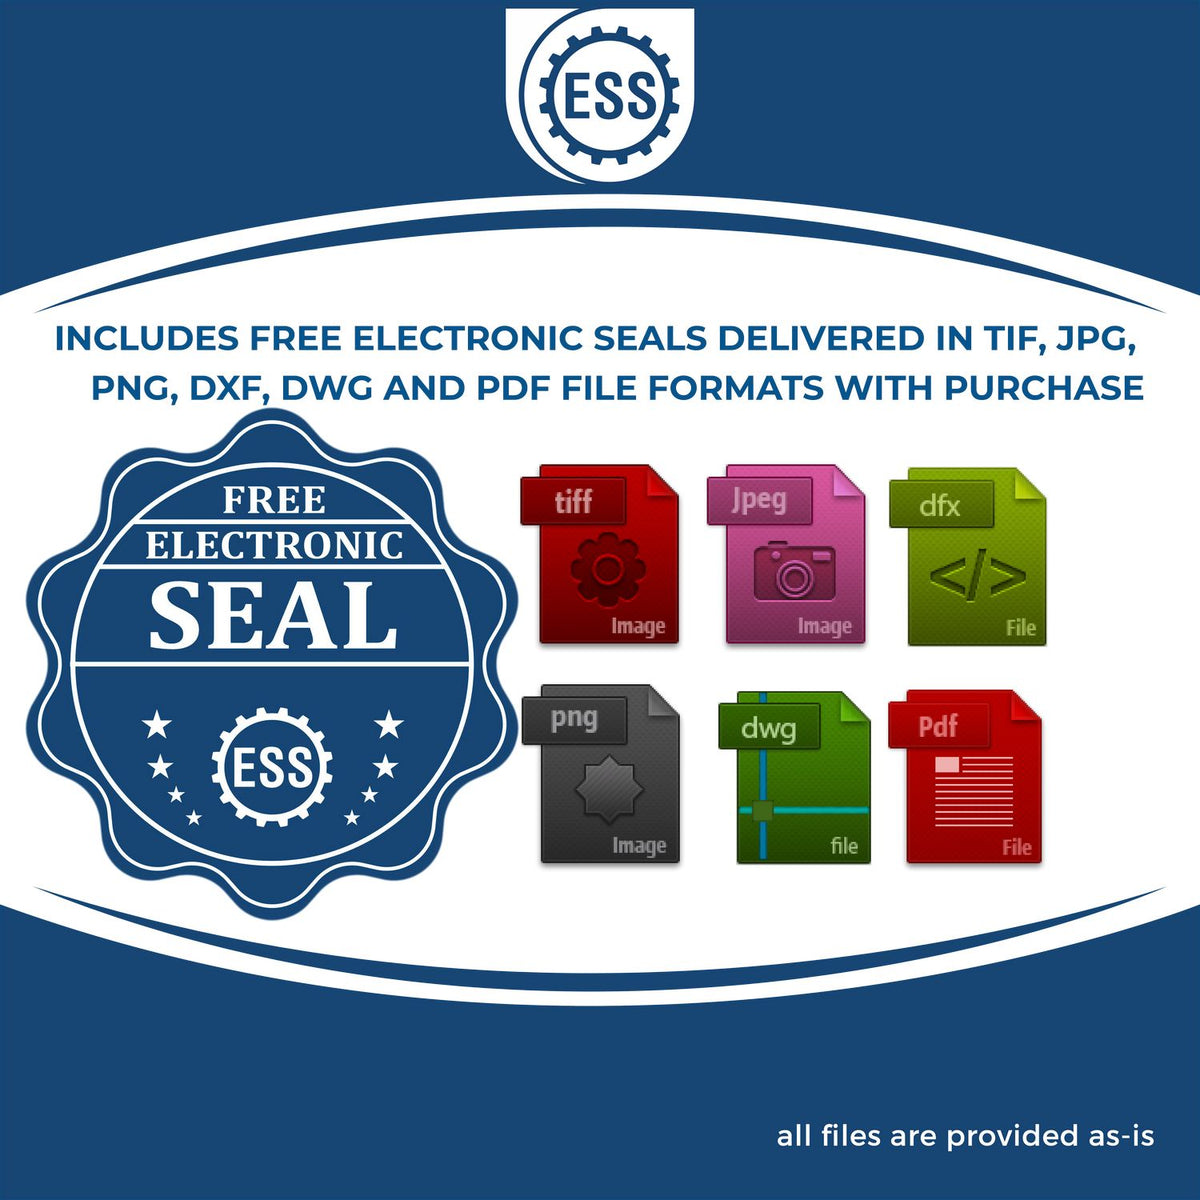 An infographic for the free electronic seal for the PSI Indiana Notary Stamp illustrating the different file type icons such as DXF, DWG, TIF, JPG and PNG.